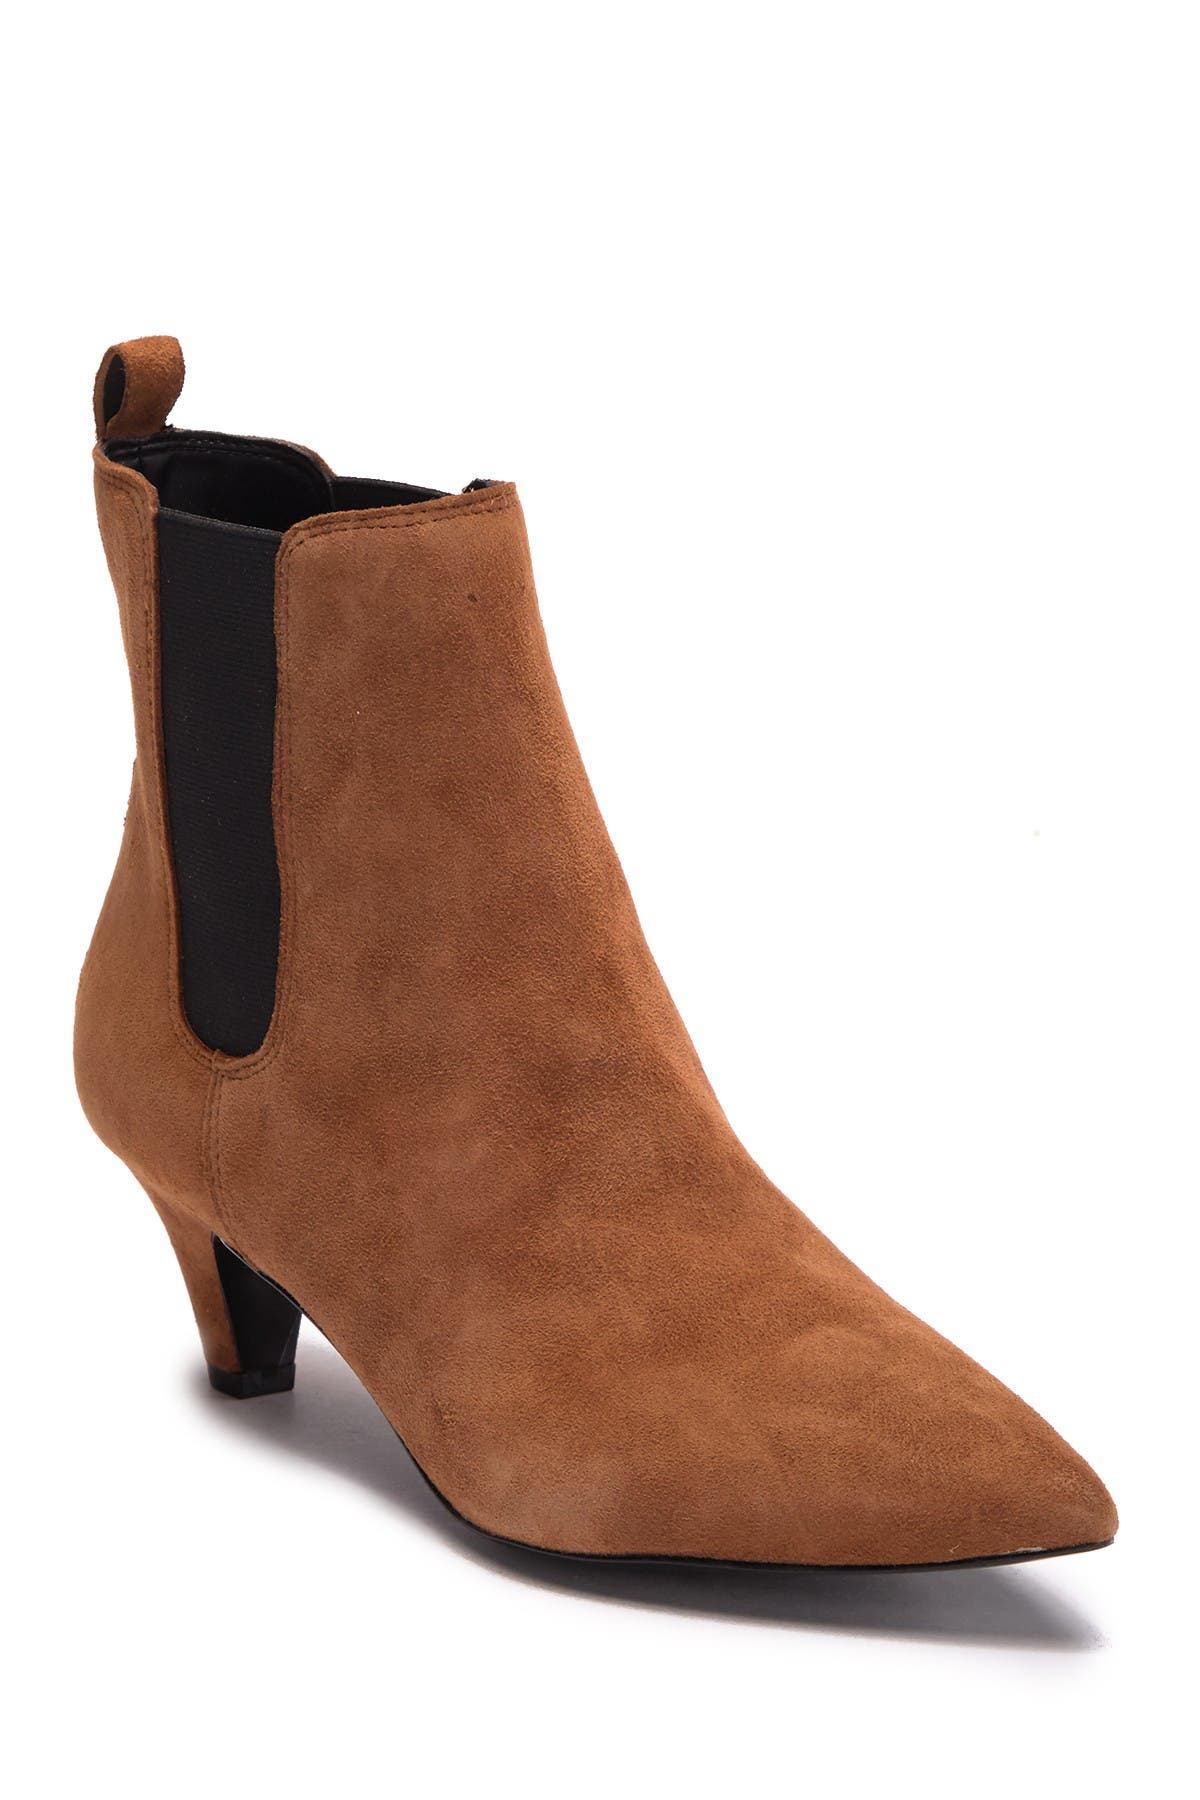 kendall and kylie pointed toe boots